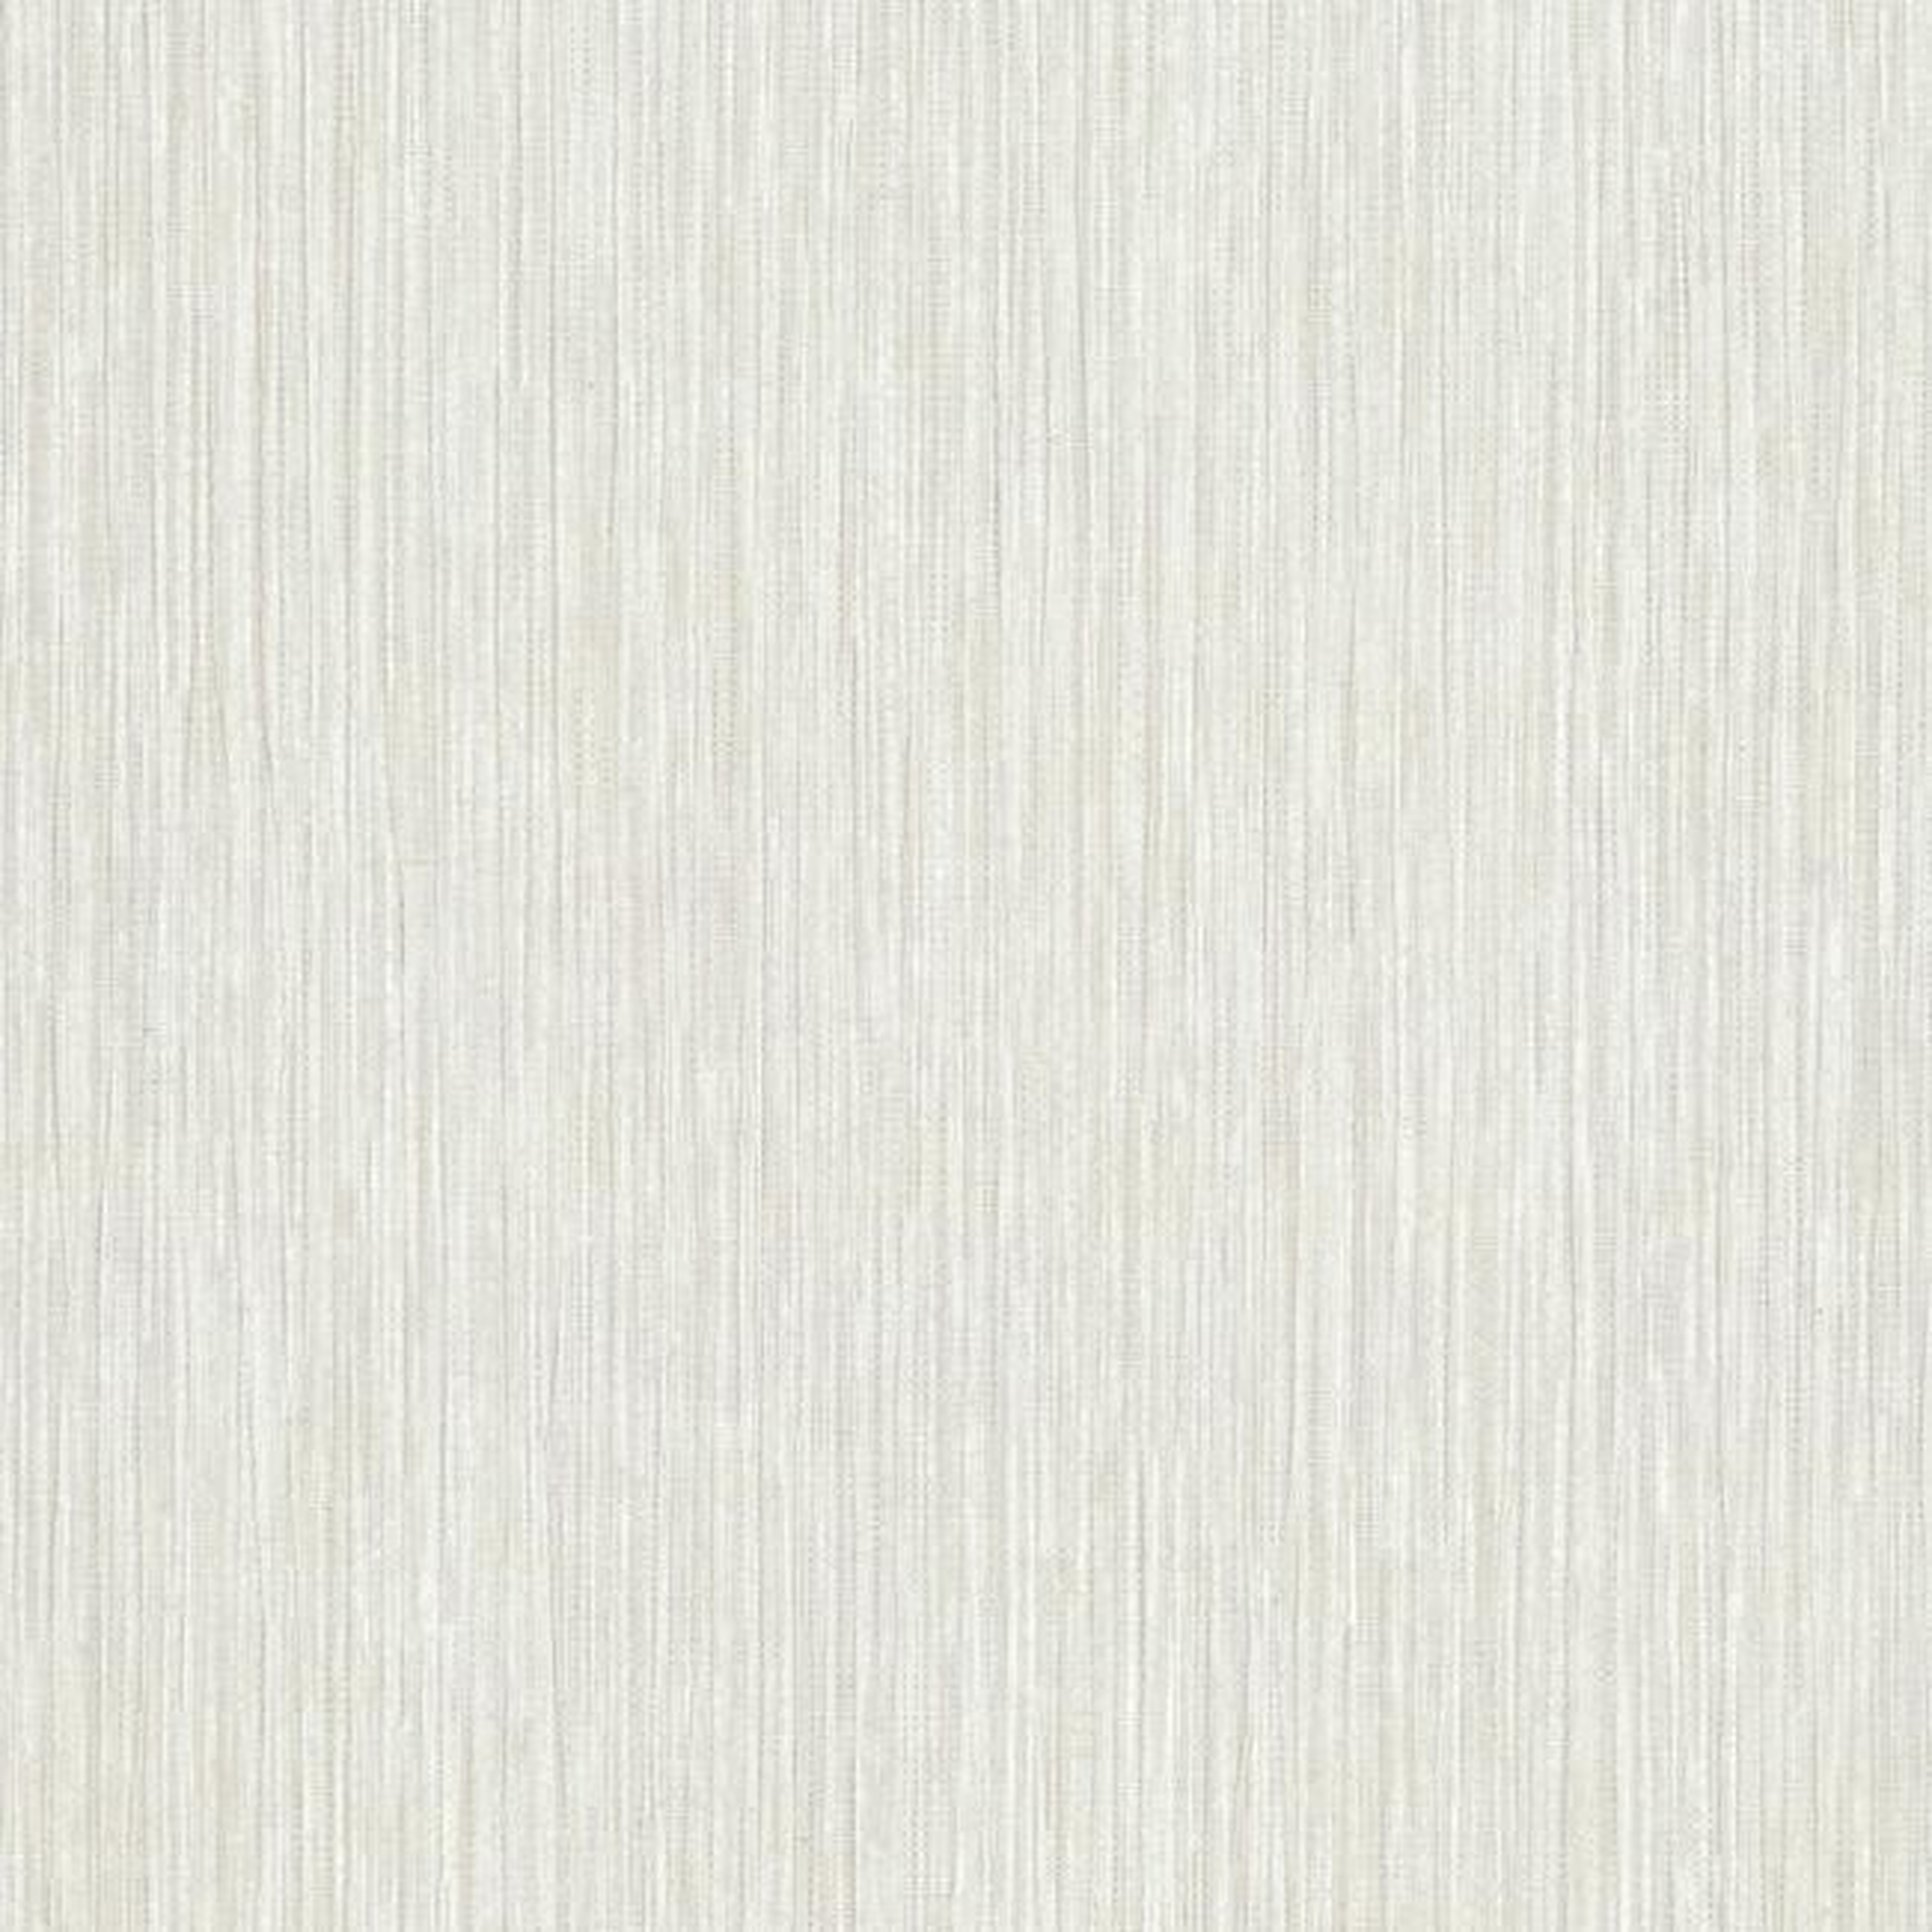 Tuck Stripe Unpasted High Performance Wallpaper, Double Roll - York Wallcoverings